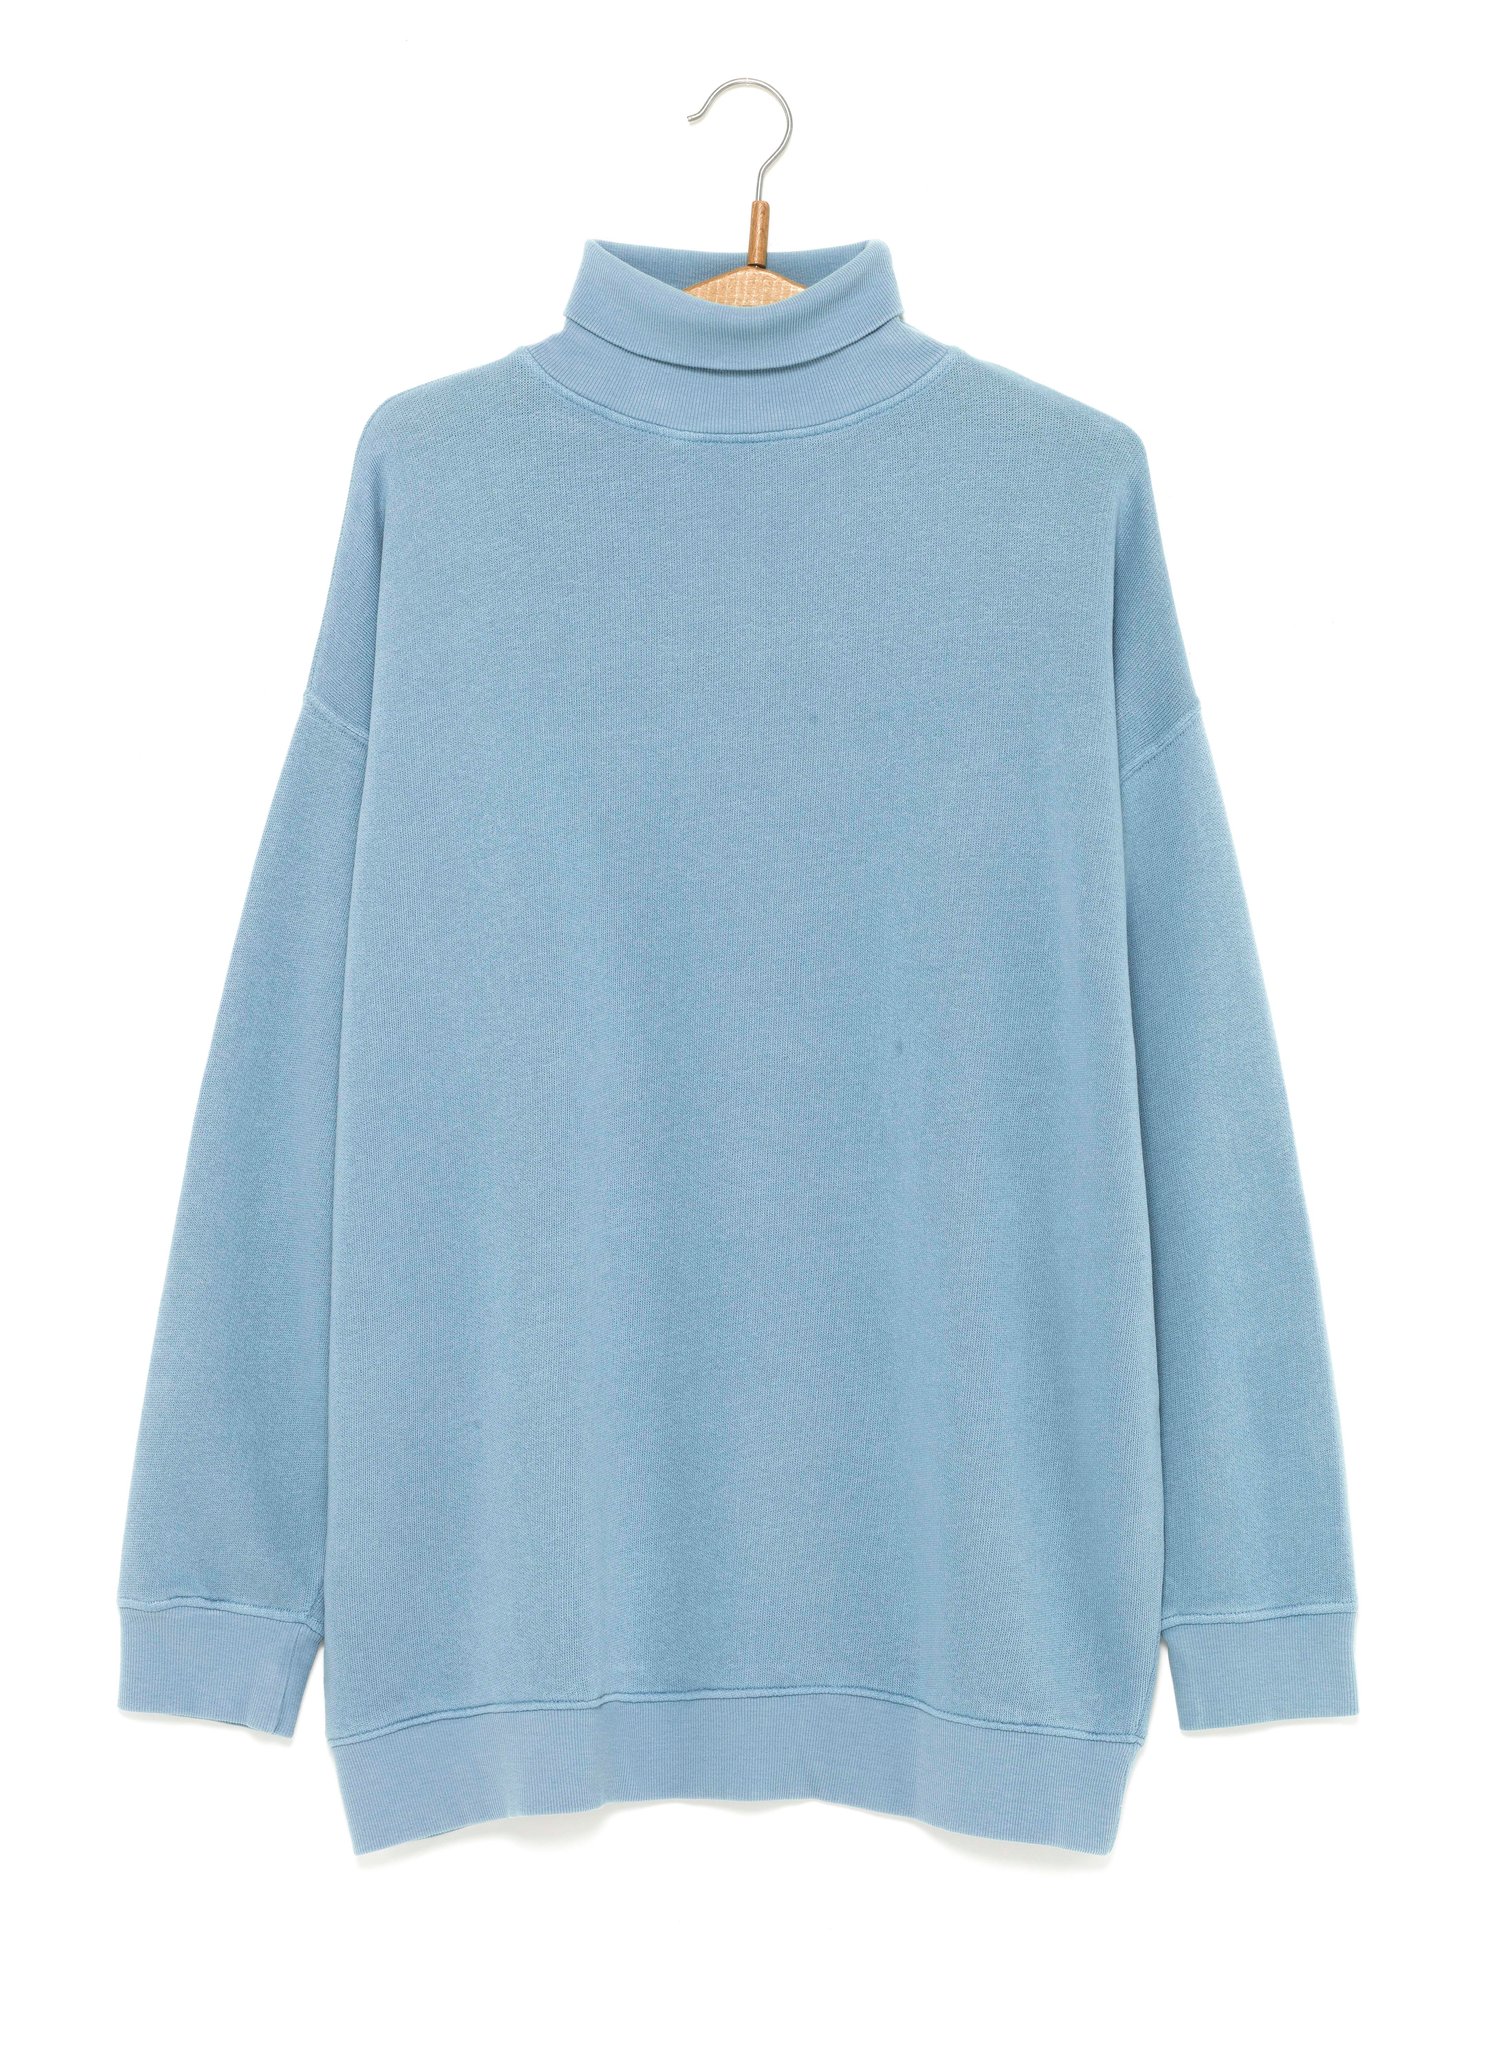 Image of Sweat molleton oversized col roulé CHANCE 99€ -50%